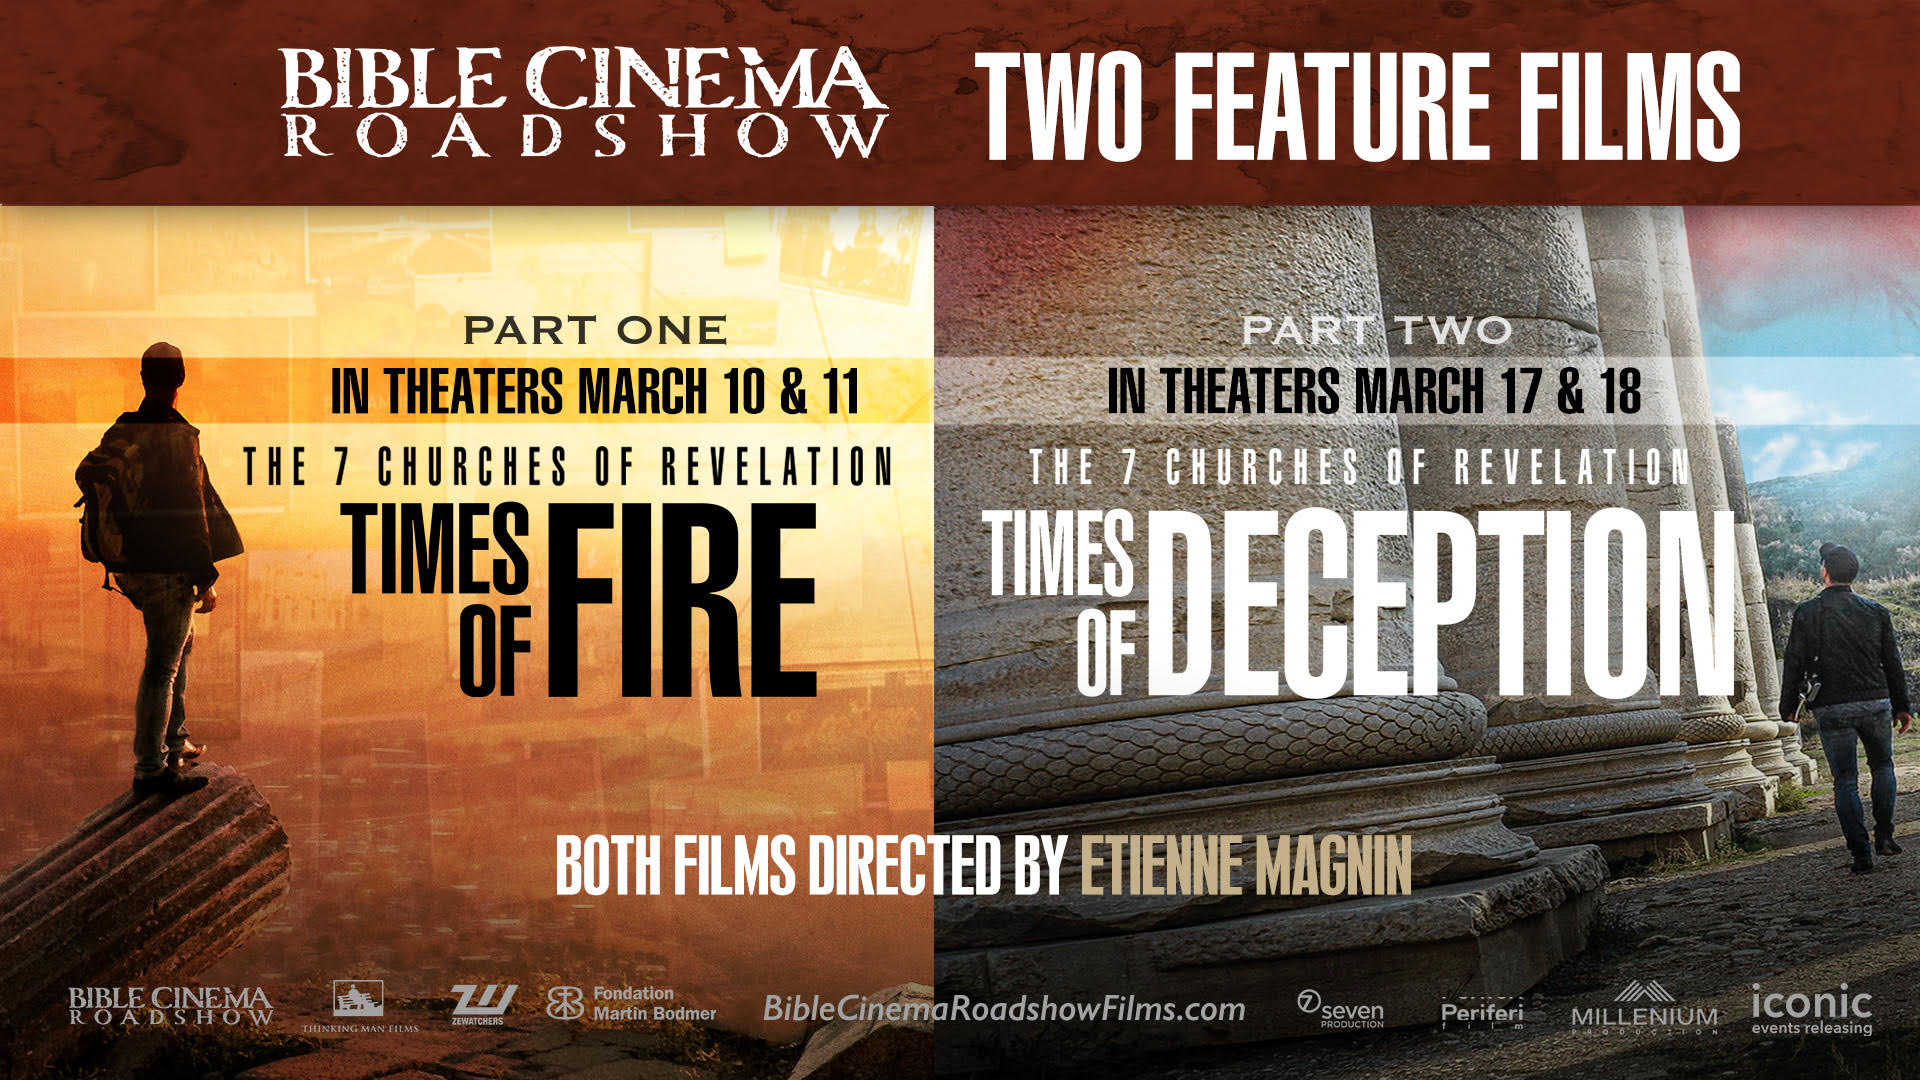 7 Churches of Revelation Times of Fire, Times of Deception - Film poster